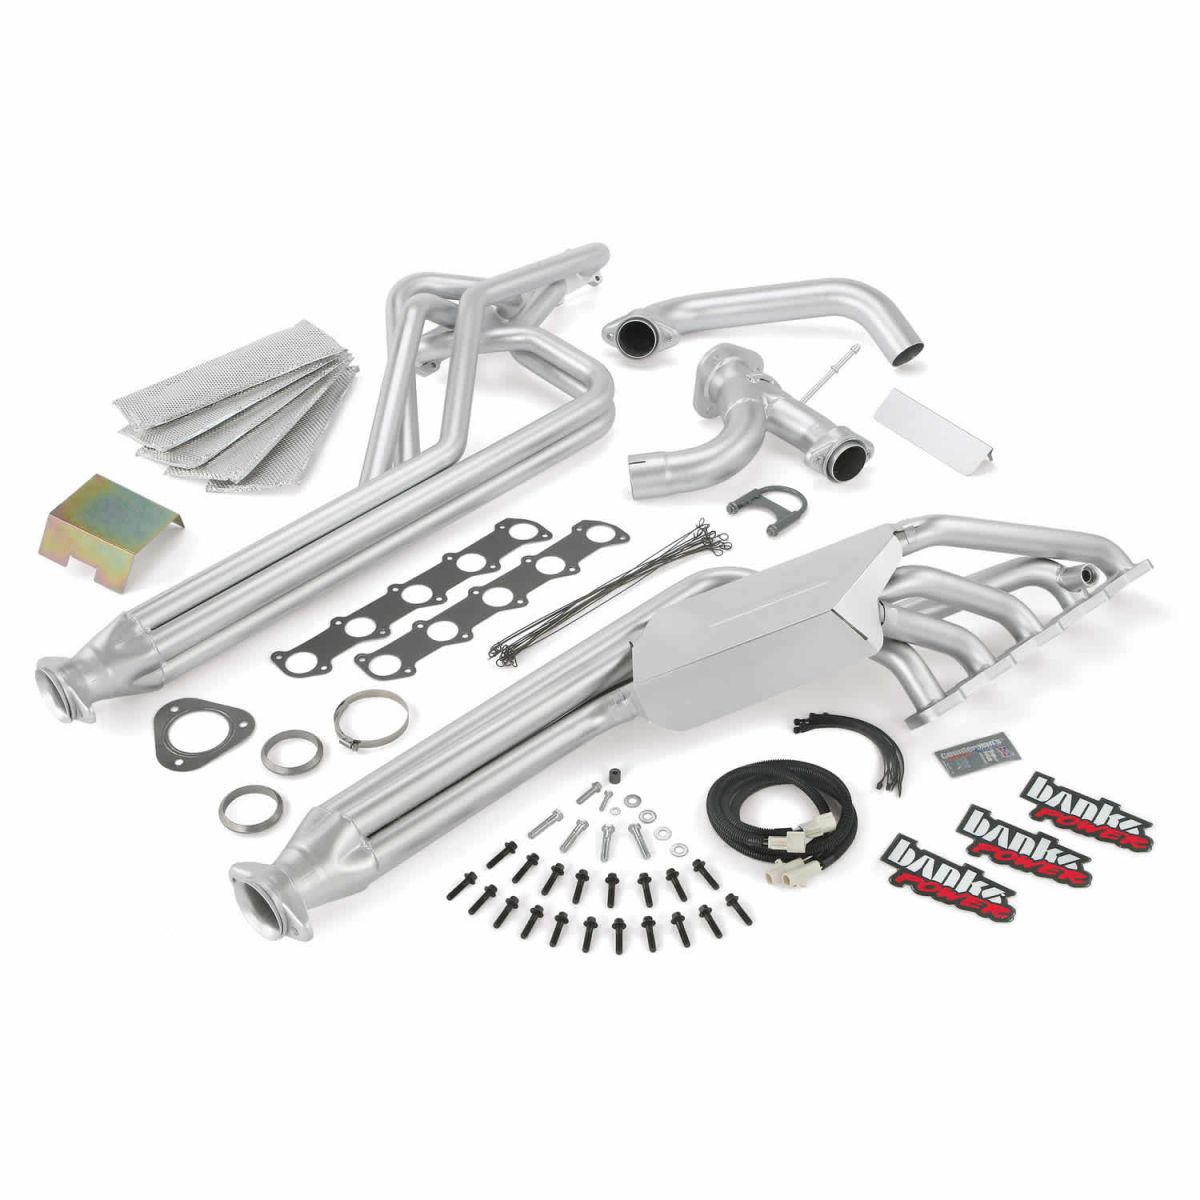 Banks Power - Banks Power Torque Tube Exhaust Header System 97-03 Ford F-53 6.8L V-10 Class-A Motorhome EGR